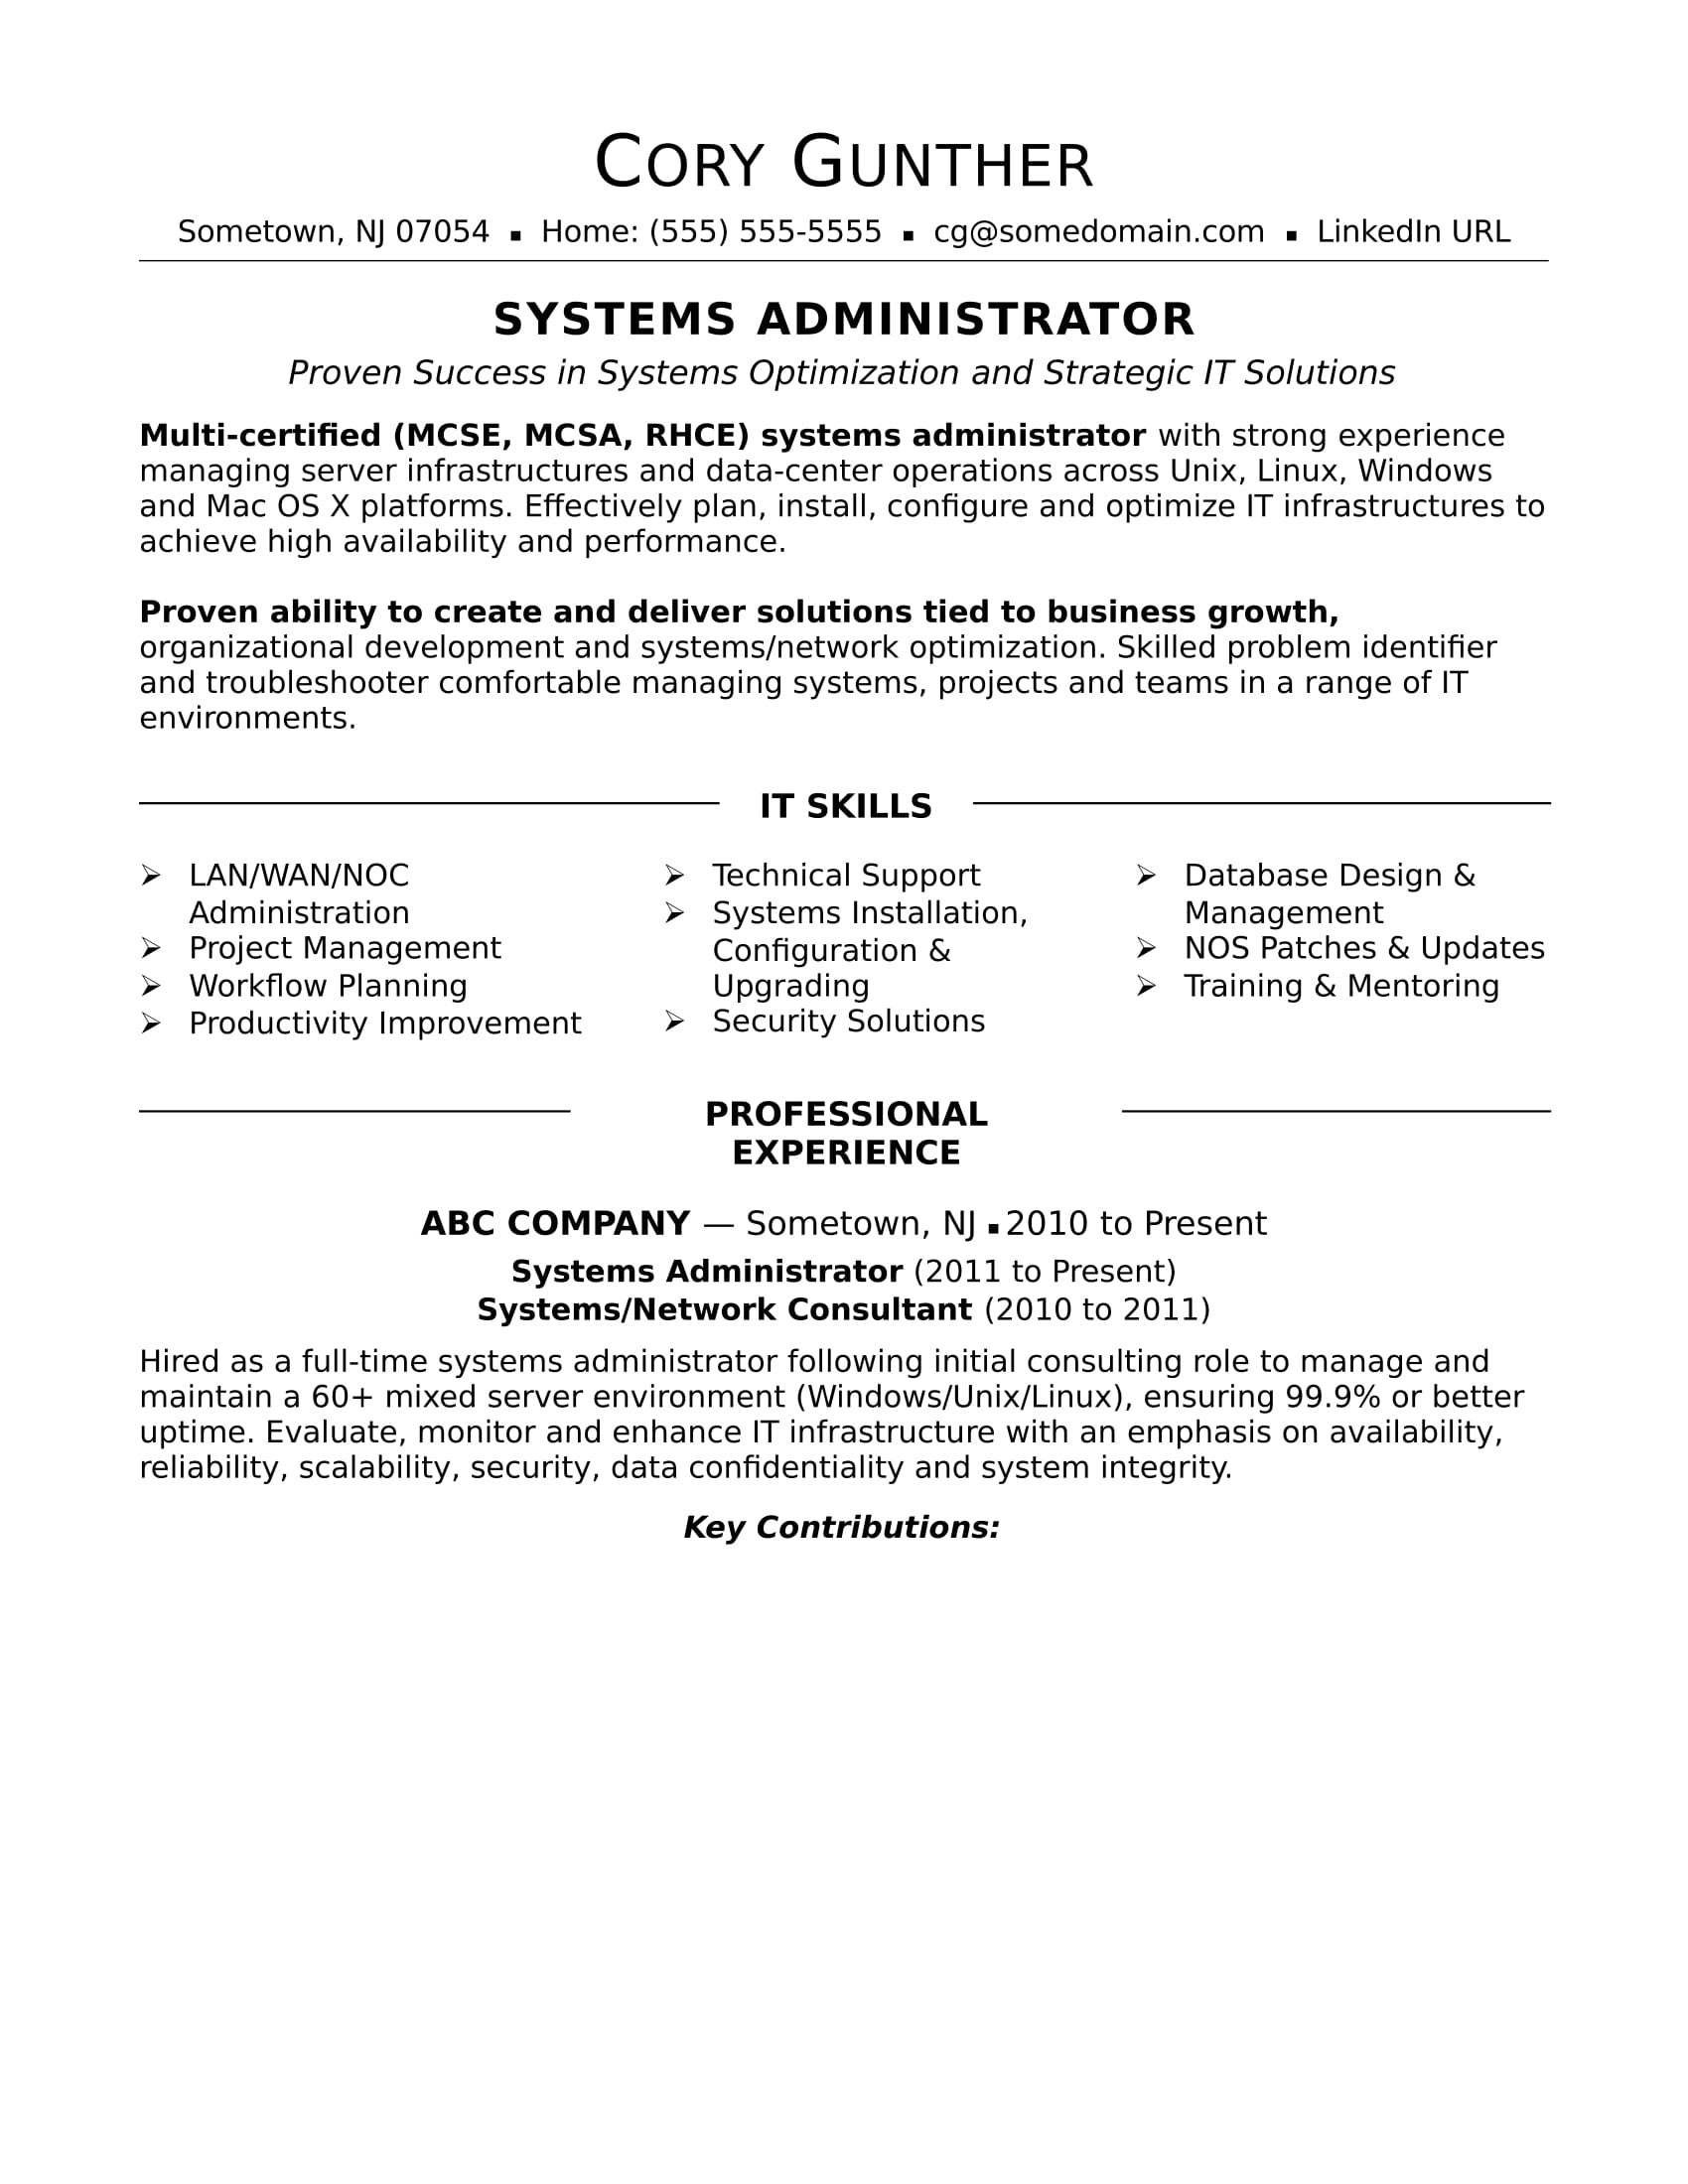 sample resume systems administrator experienced